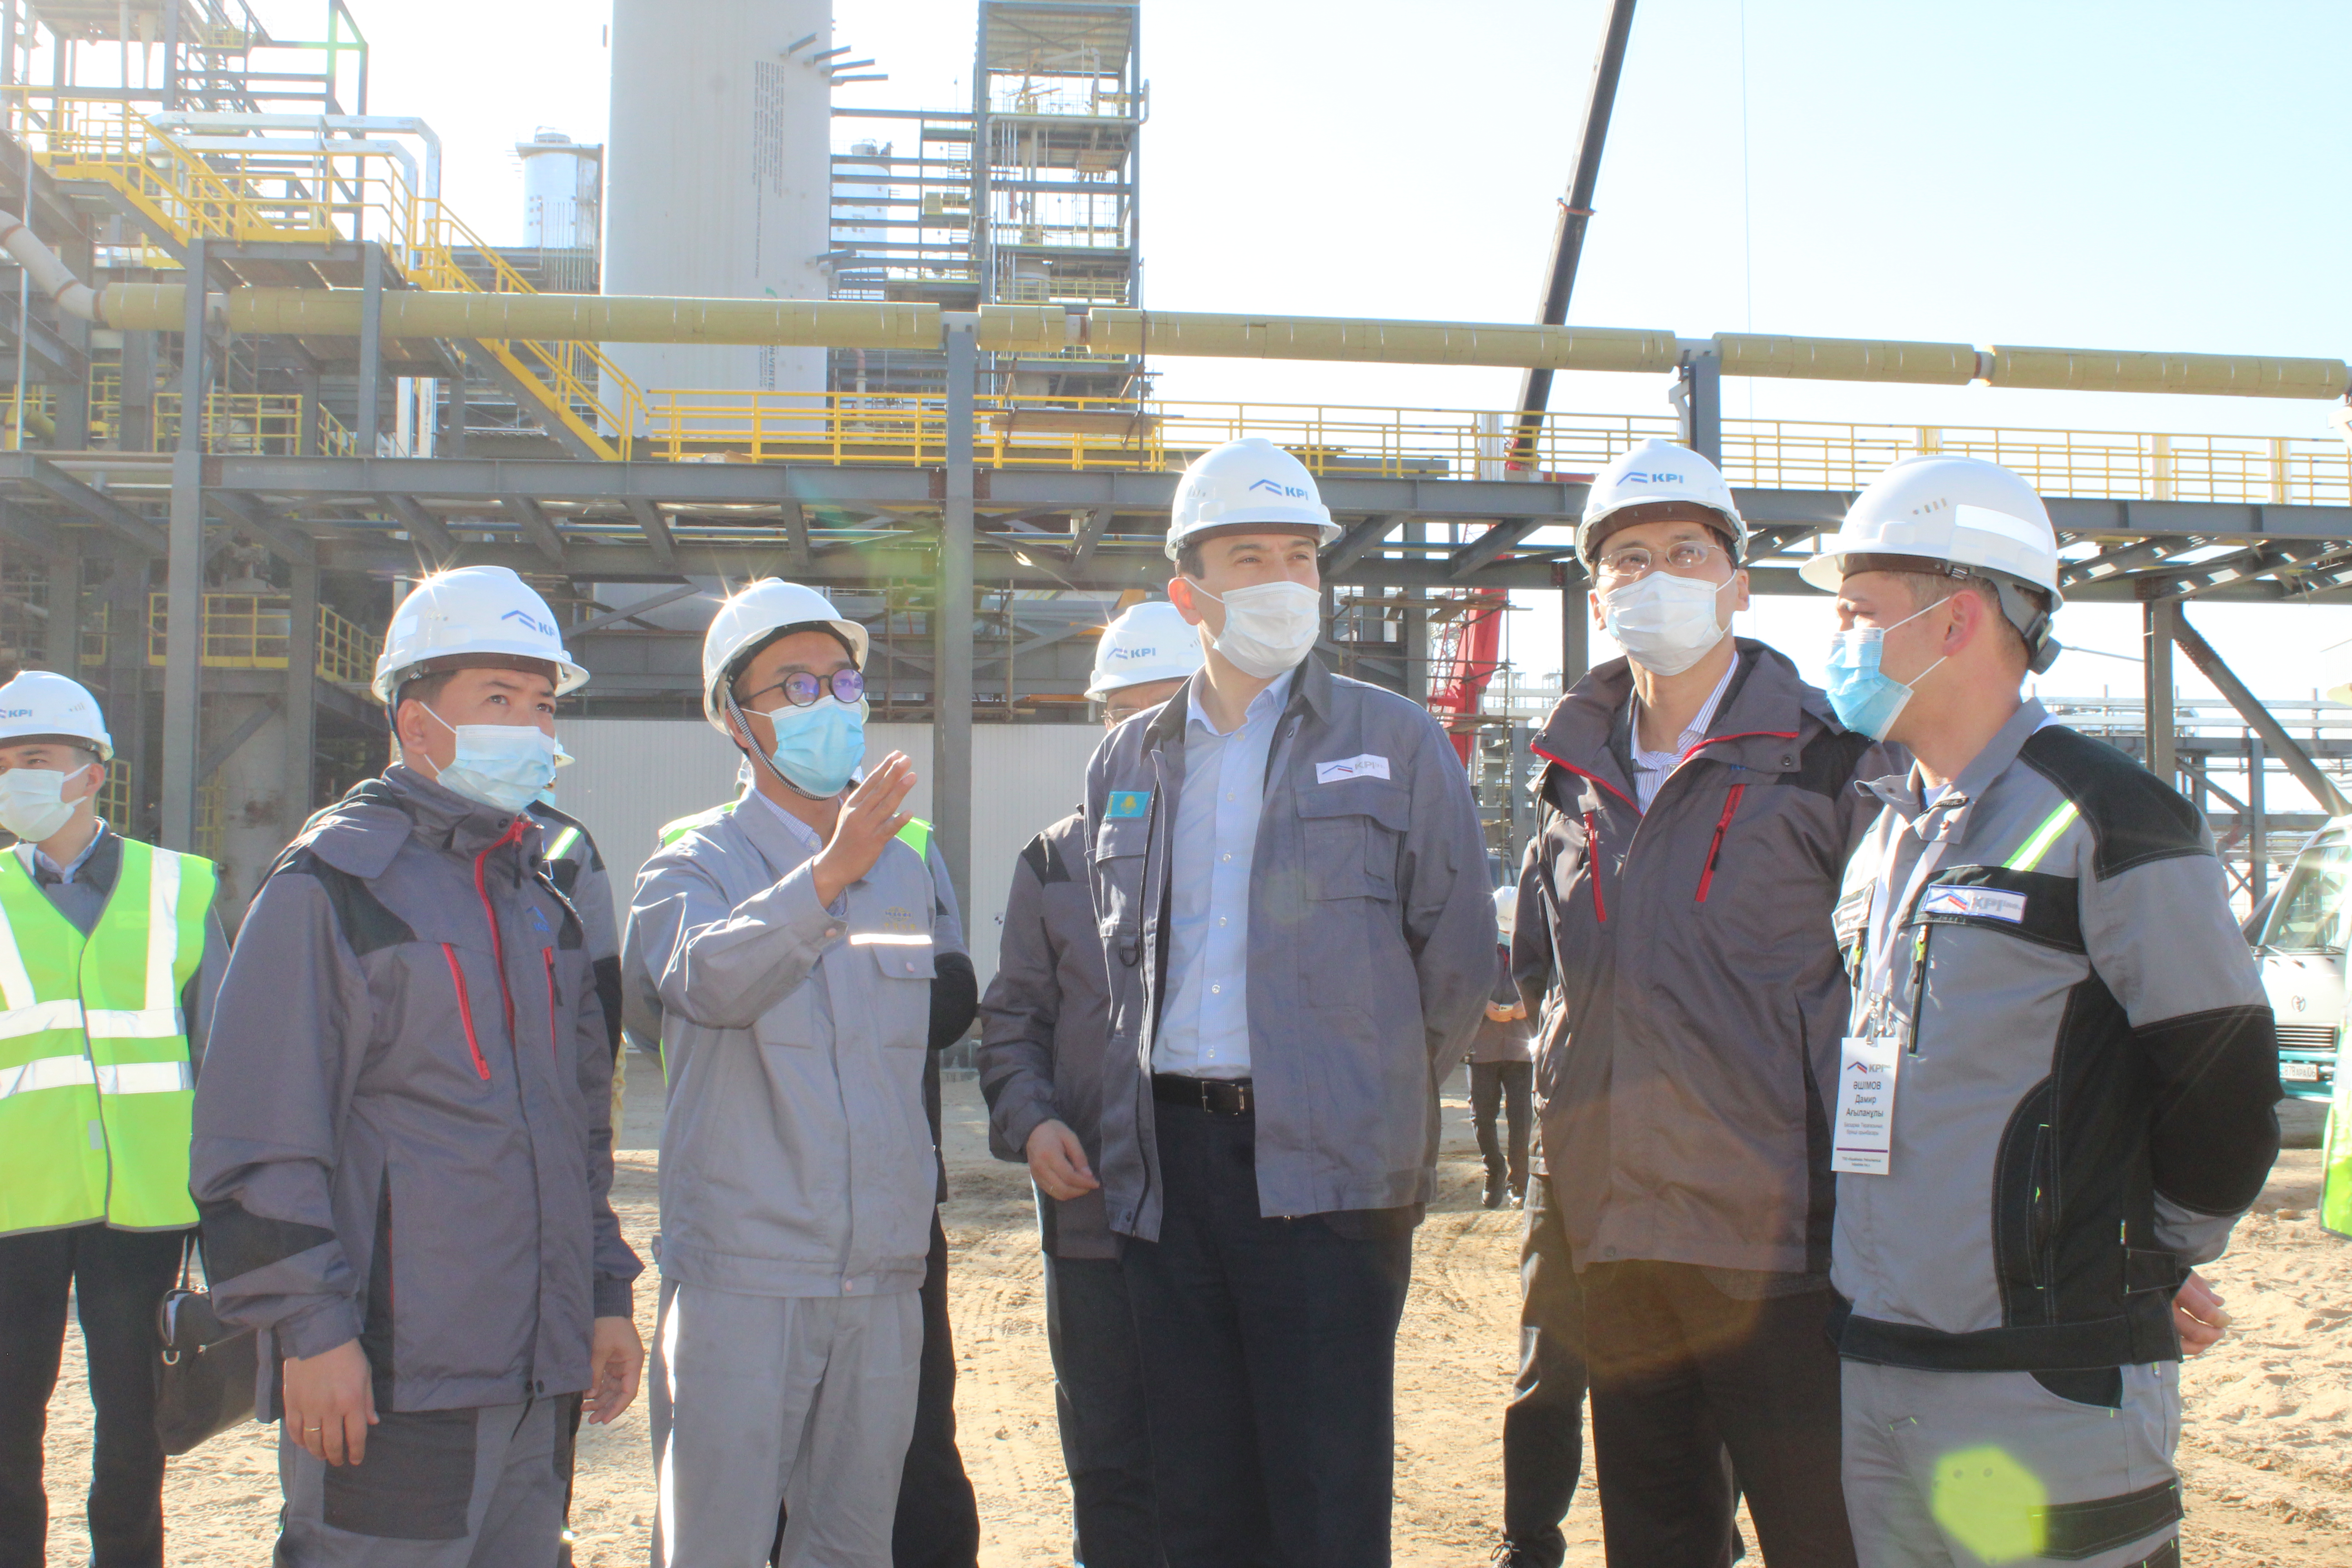 Energy Minister Magzum Mirzagaliyev visited a polypropylene production plant under construction in Atyrau region